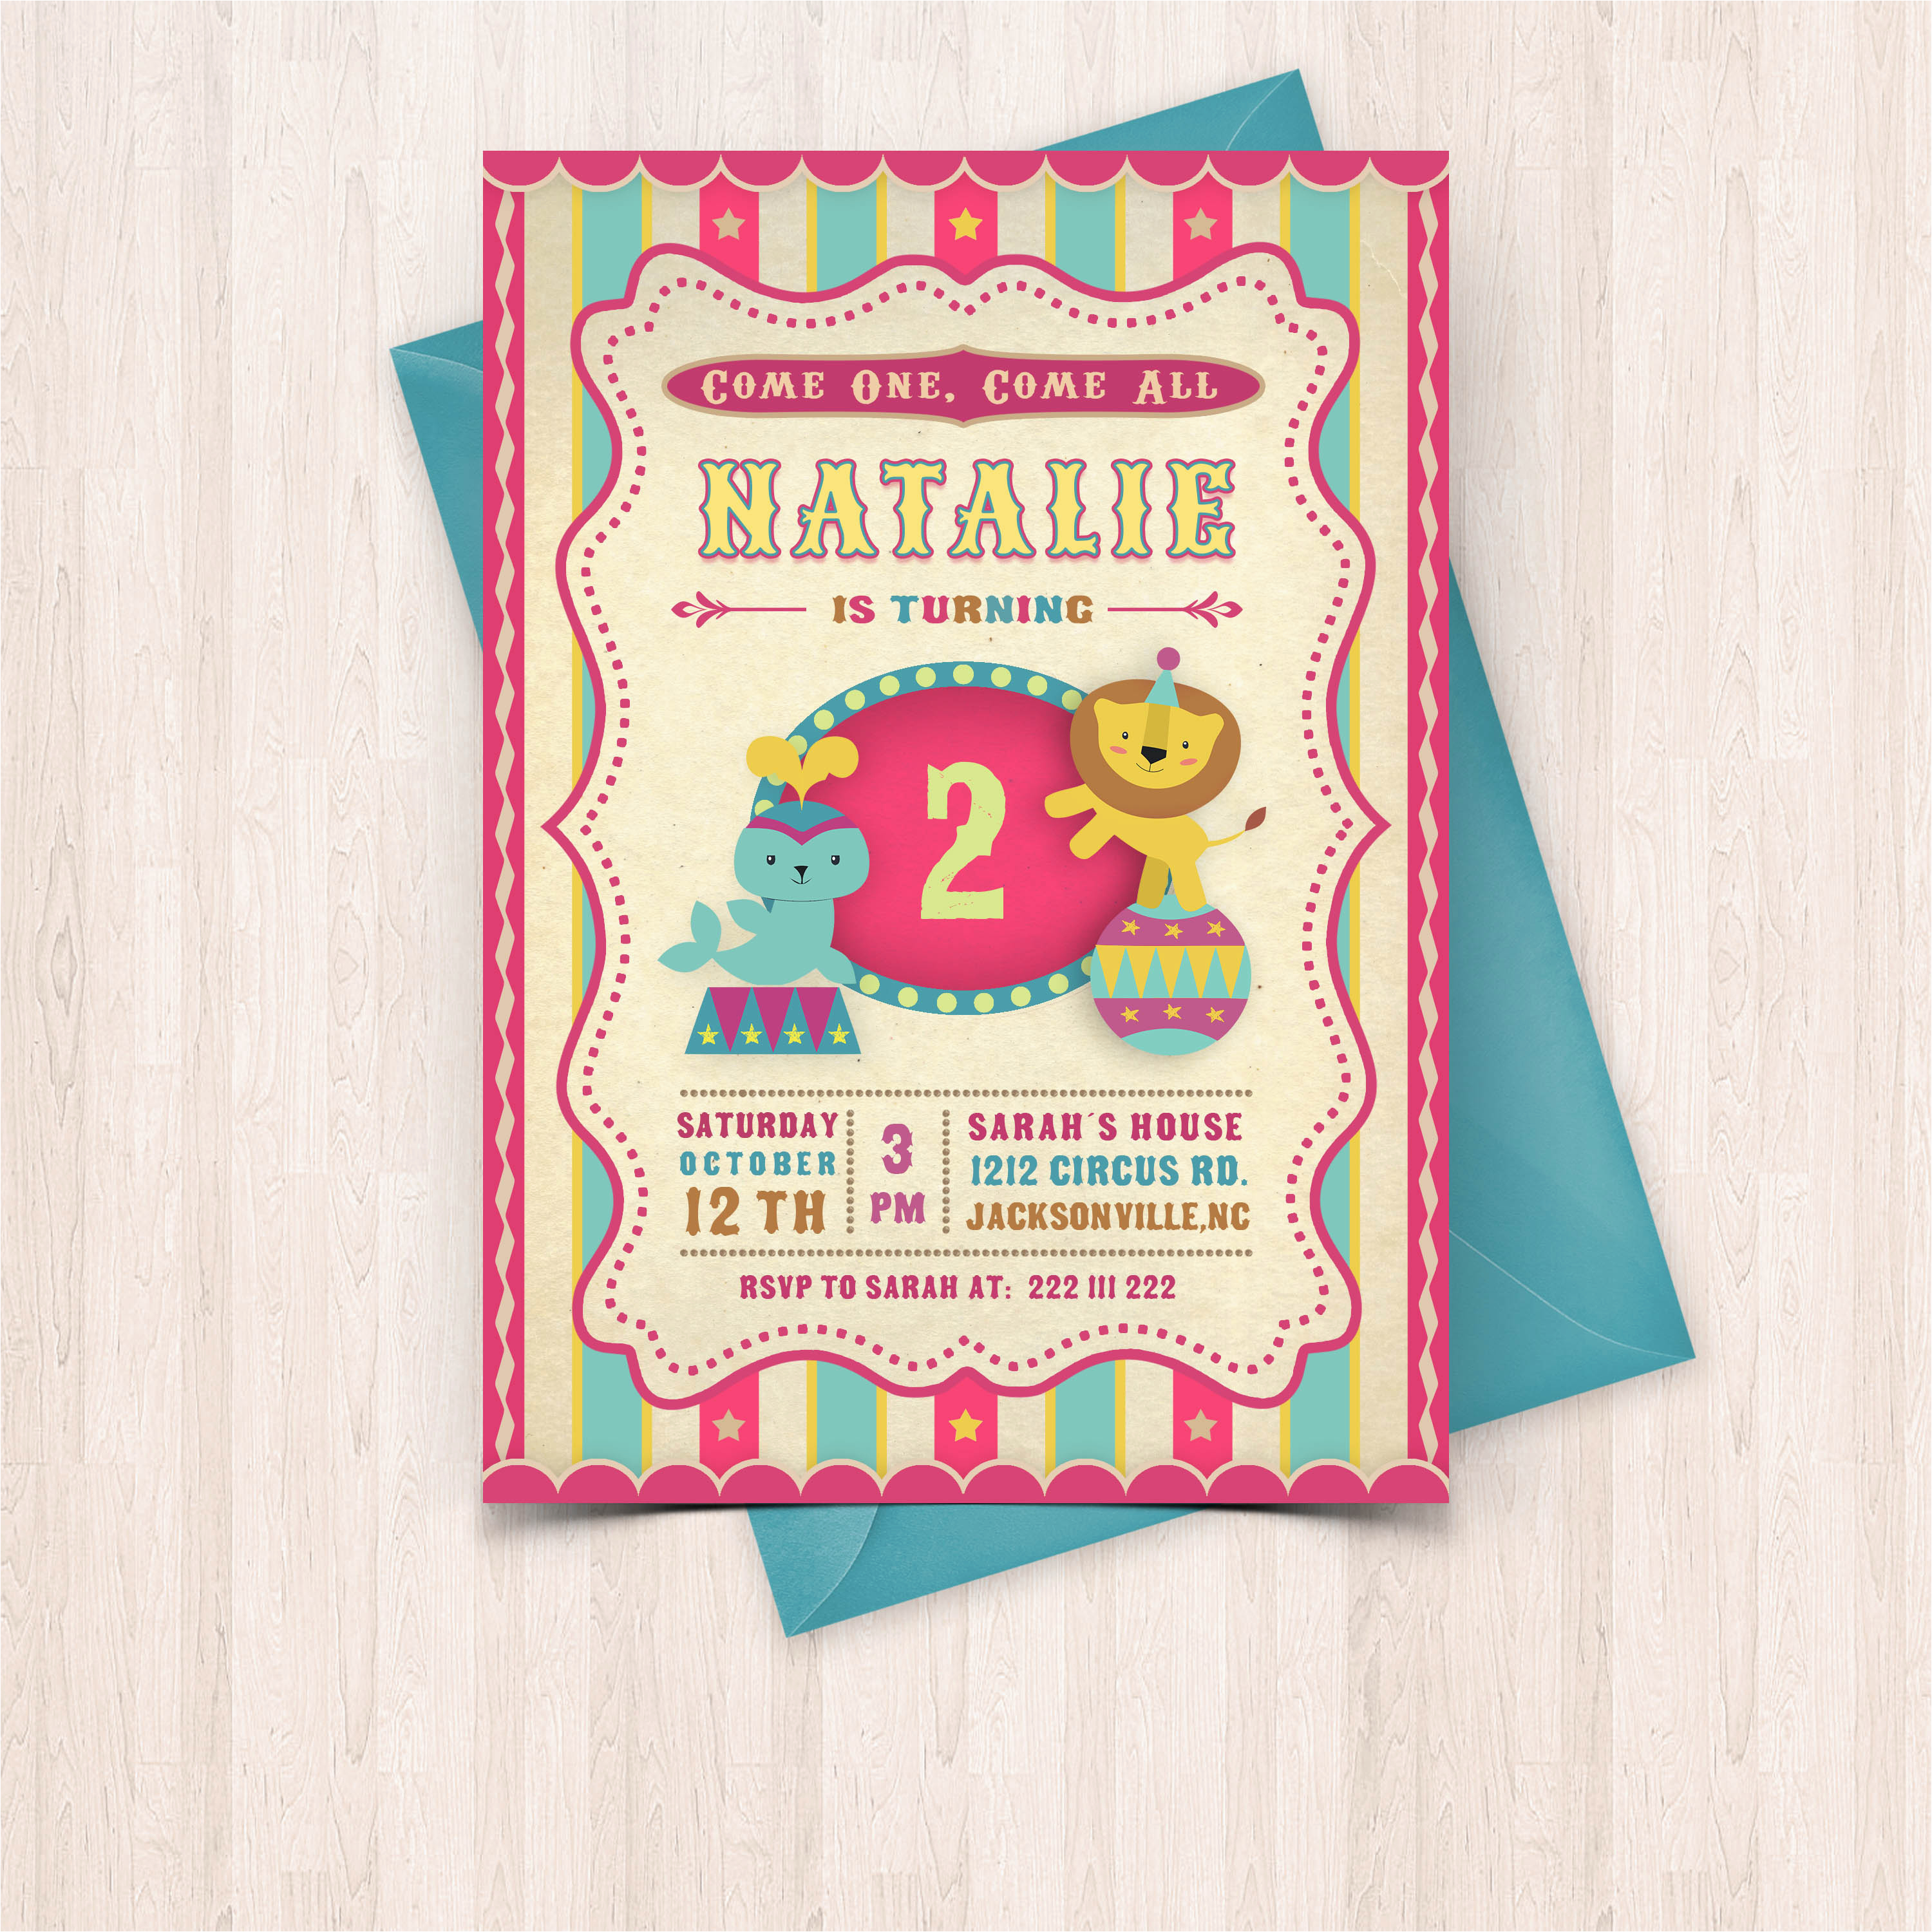 printable circus birthday invitations free thank you cards to print at home